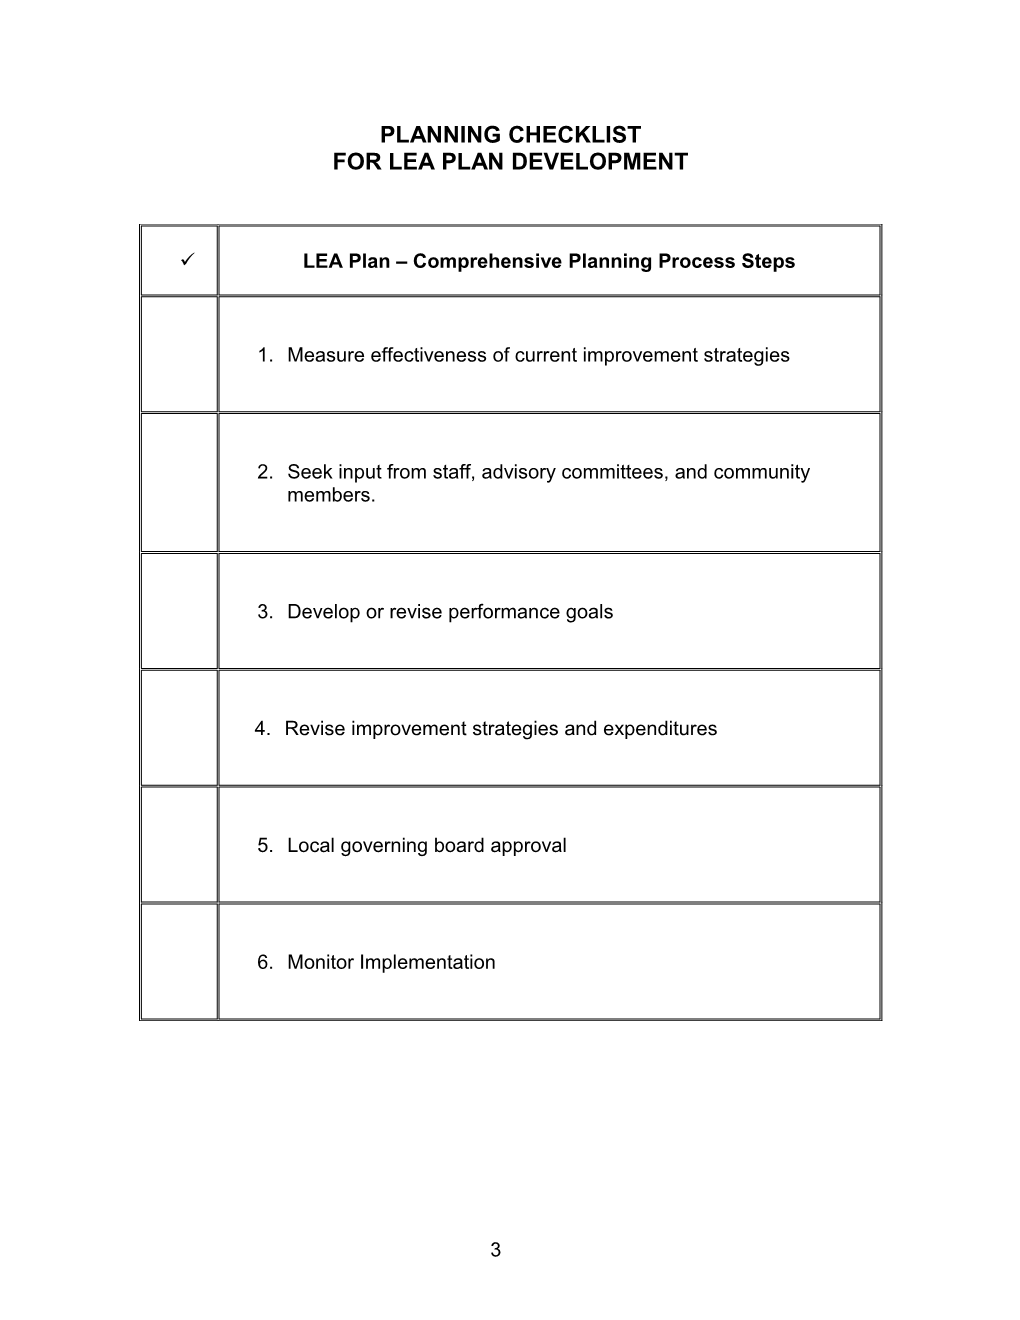 LEA Plan Template for Leas in PI Year 3 - Title I, Part A-Accountability (CA Dept of Education)